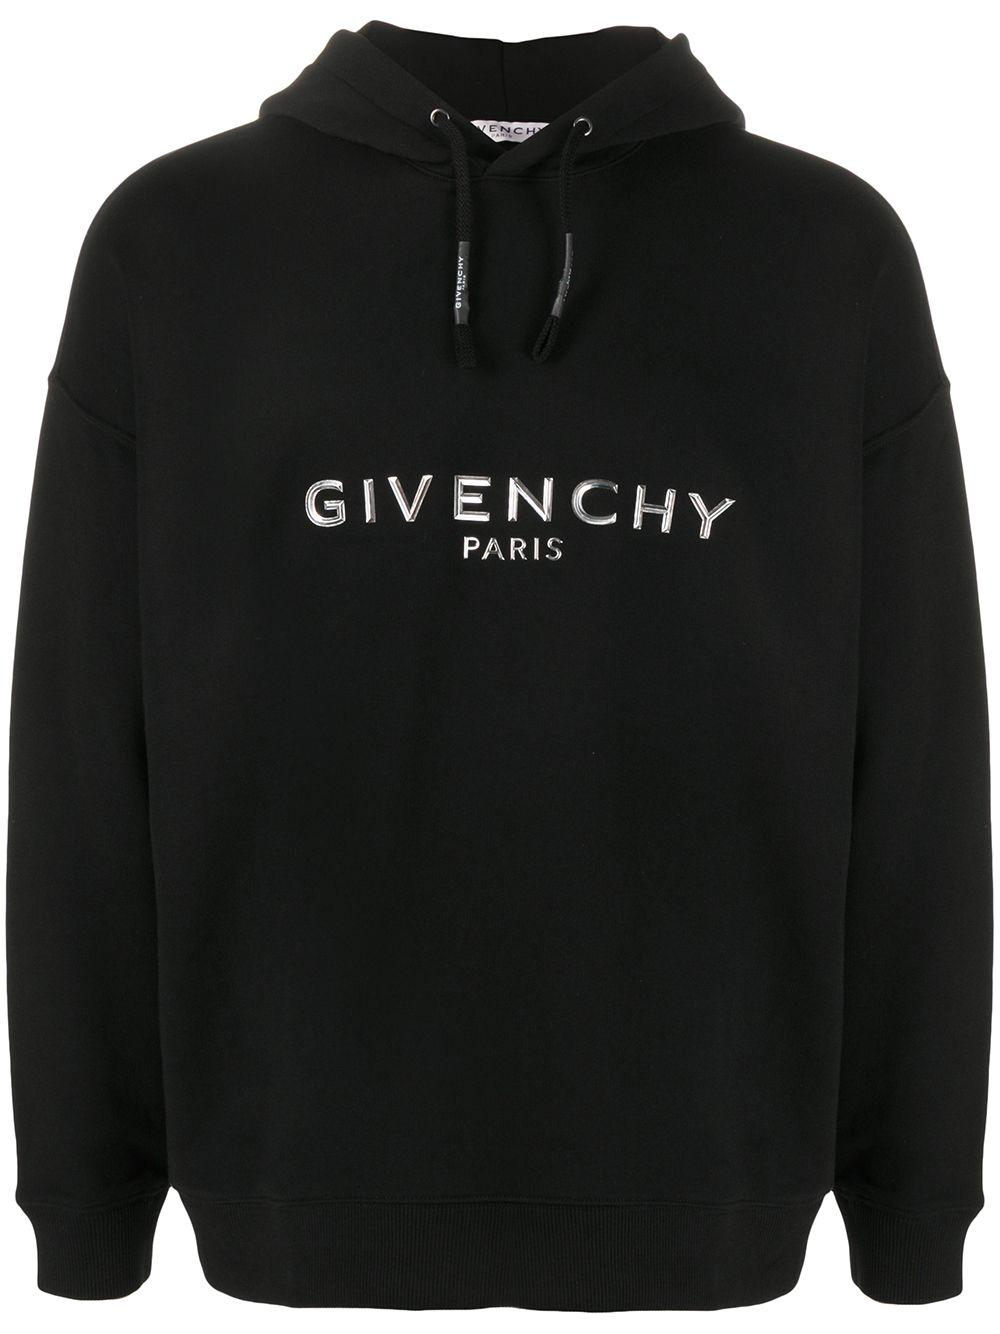 Givenchy Embossed Logo Hoodie in Black for Men - Save 46% - Lyst